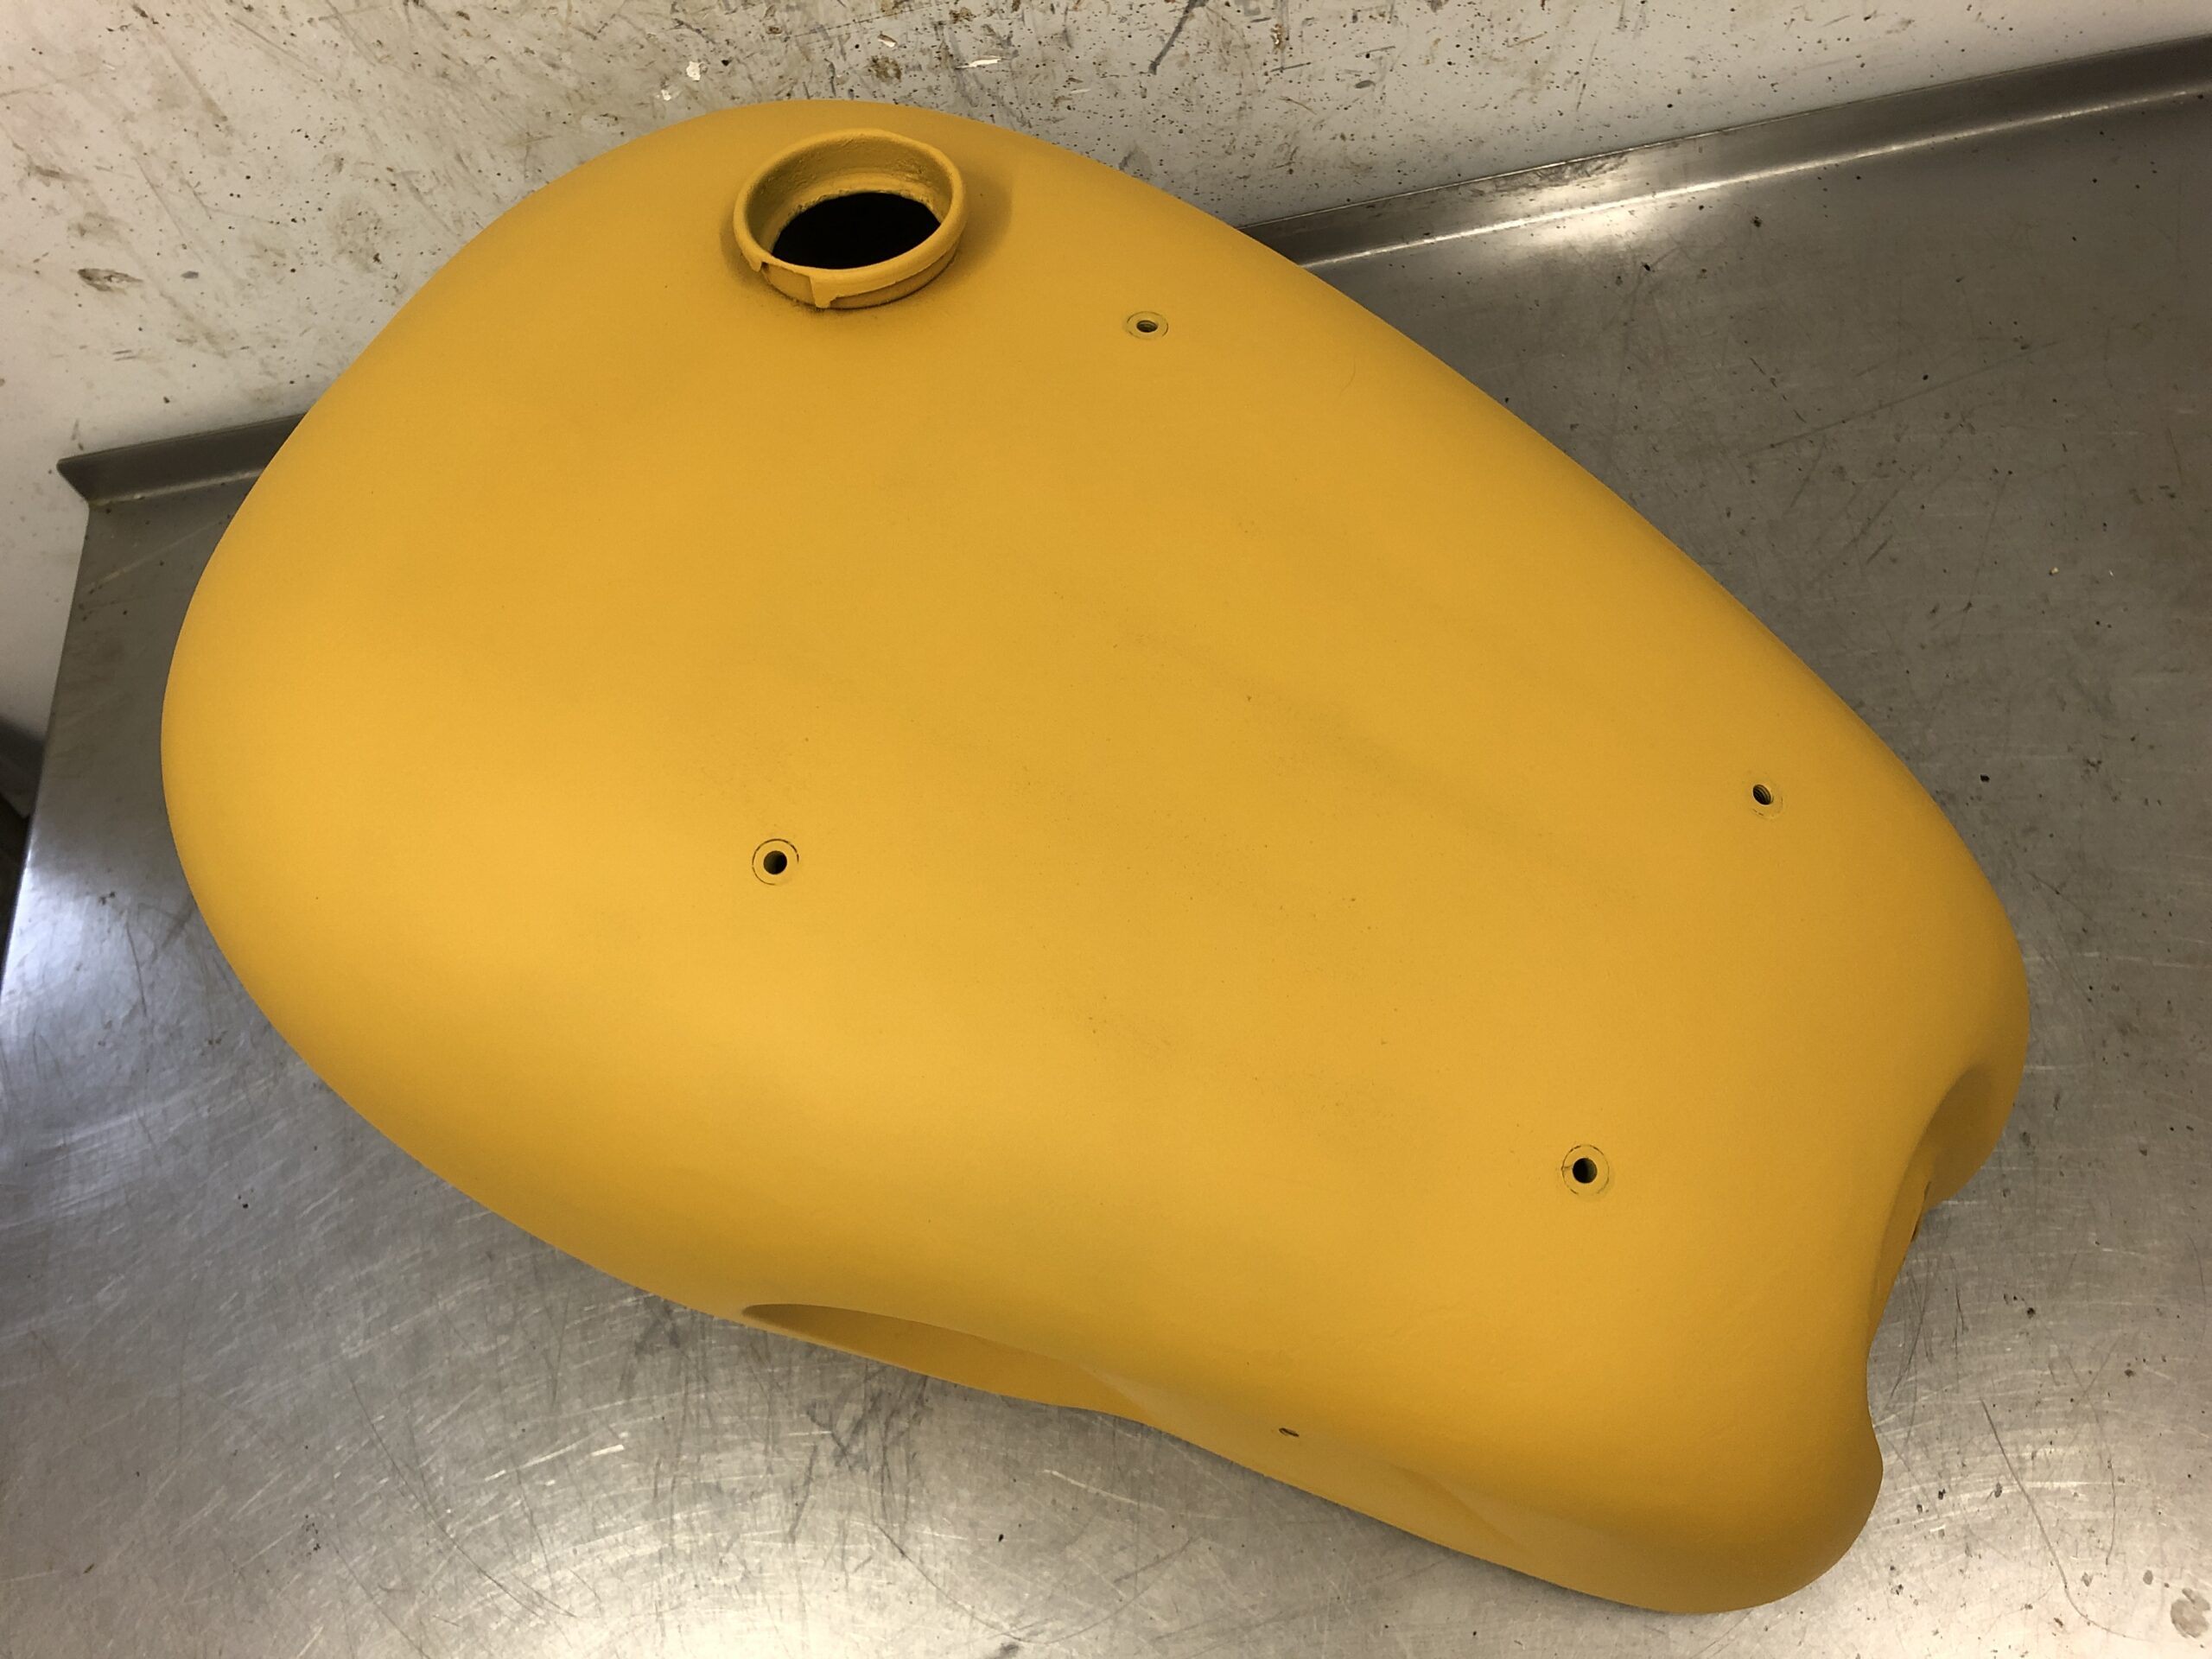 Original Triumph fuel gas petrol tank 1949 1950 3T De Luxe T100 Speed Twin  5t motorcycles – SOLD - The Timing Chest